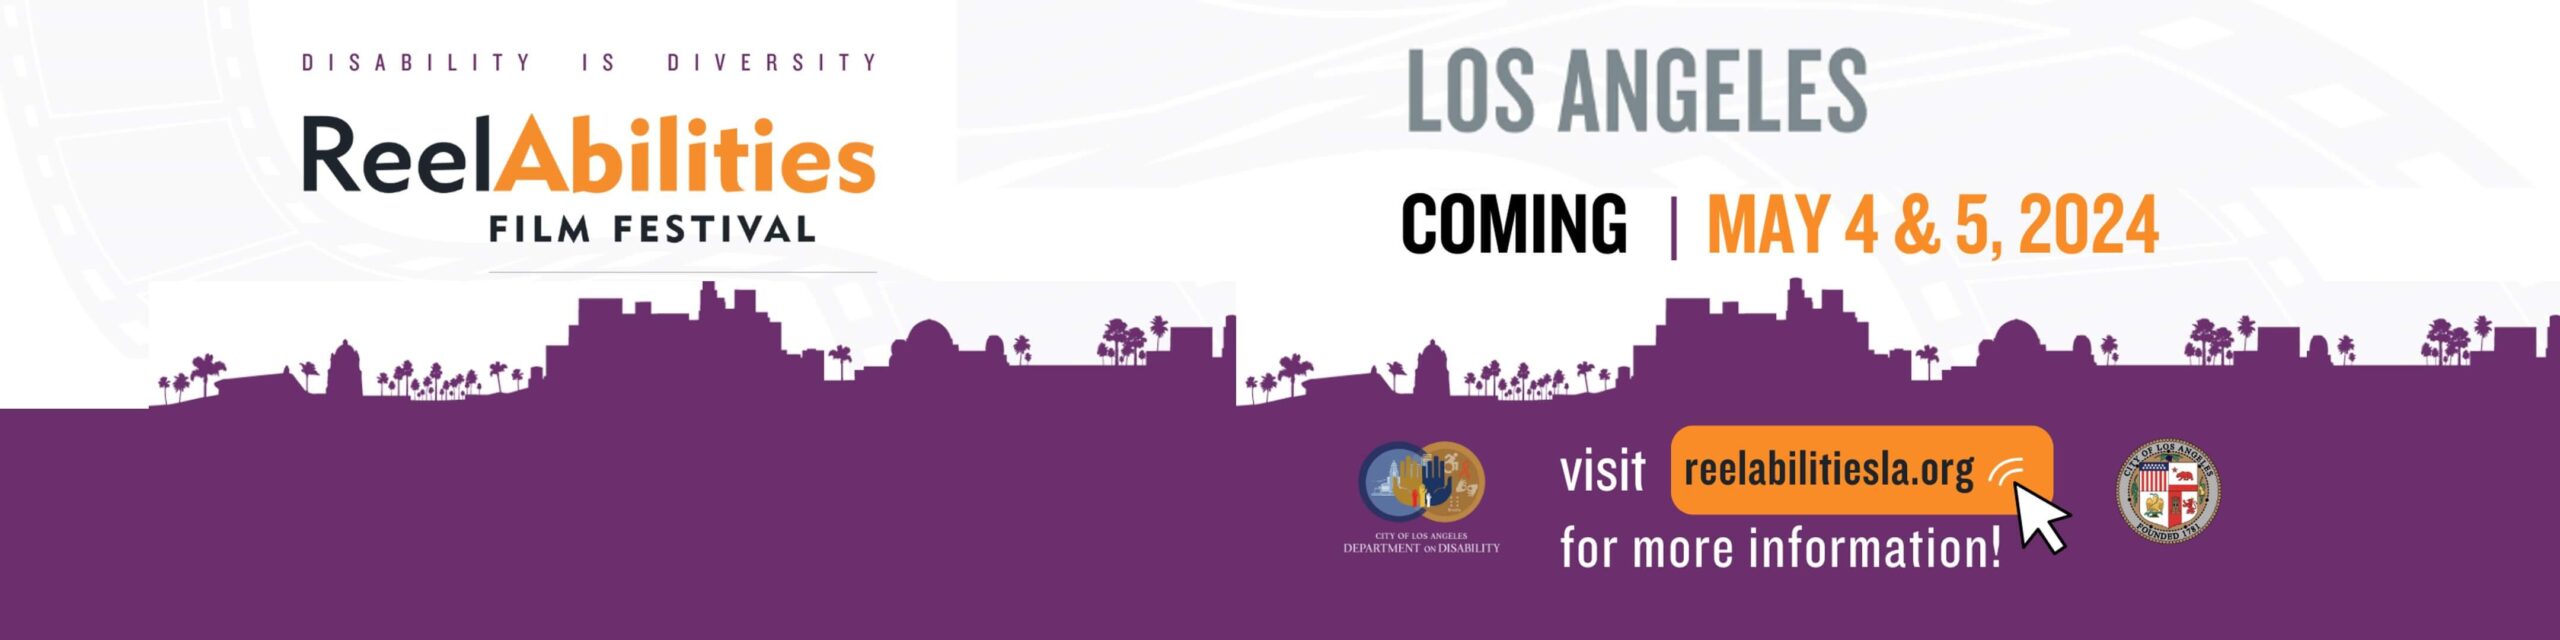 ReelAbilities Film Festival Los Angeles Coming May 4 & 5, 2024. Click here to learn more.